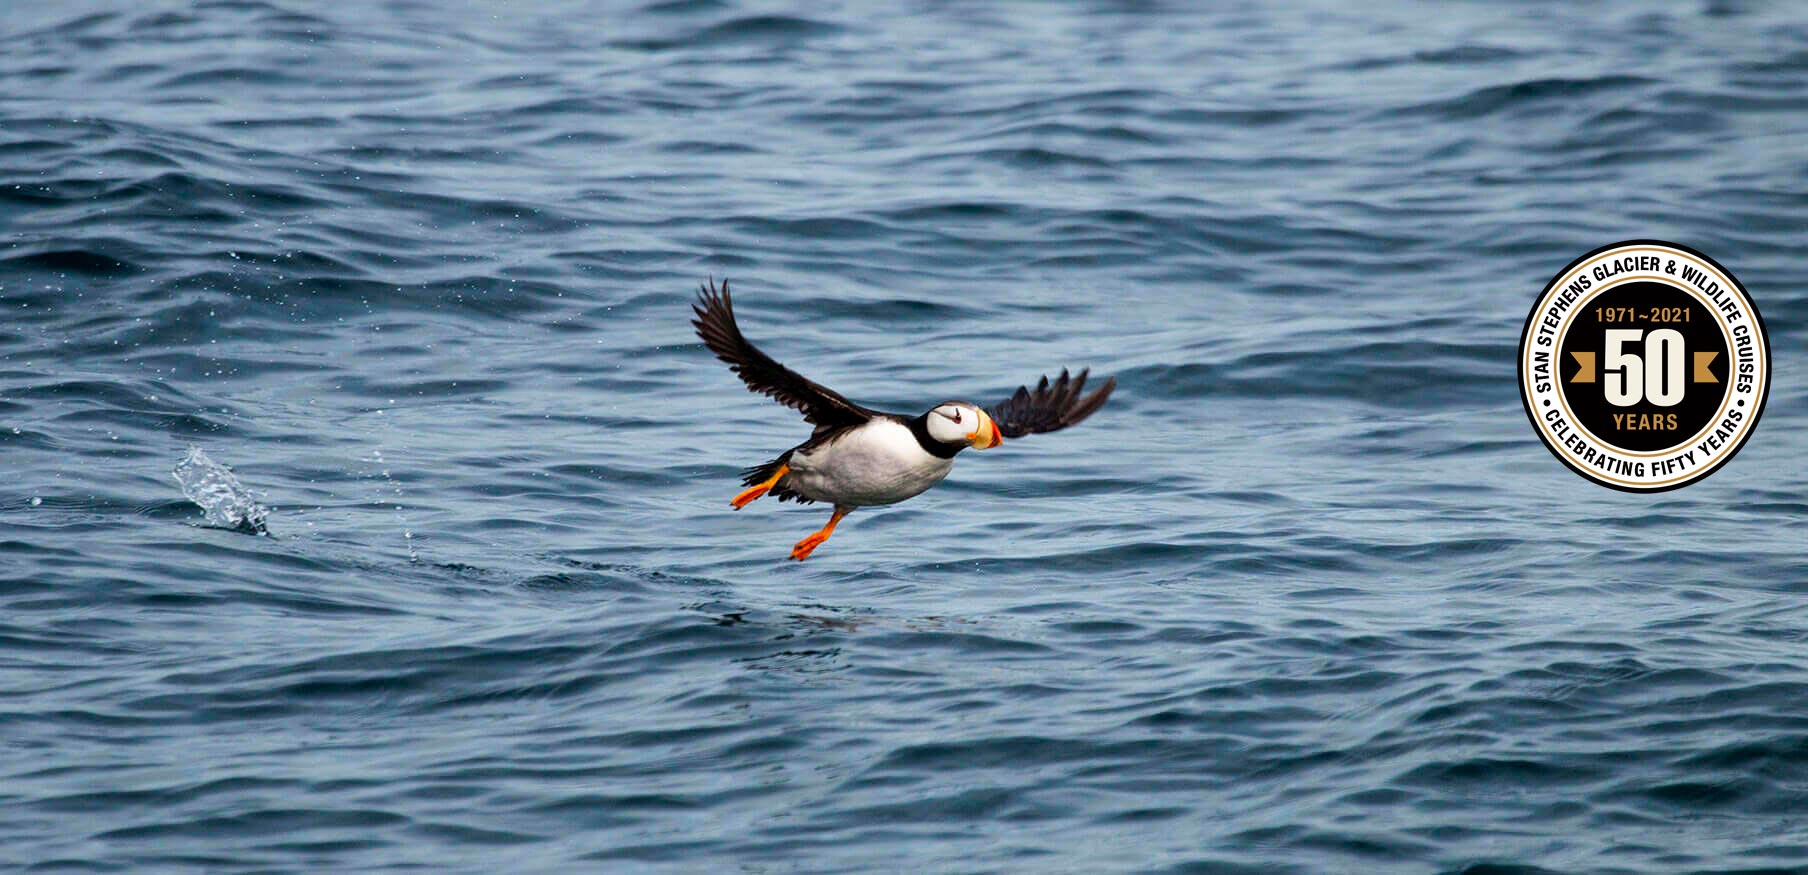 Puffin flying over the ocean and 50th Anniversary Seal